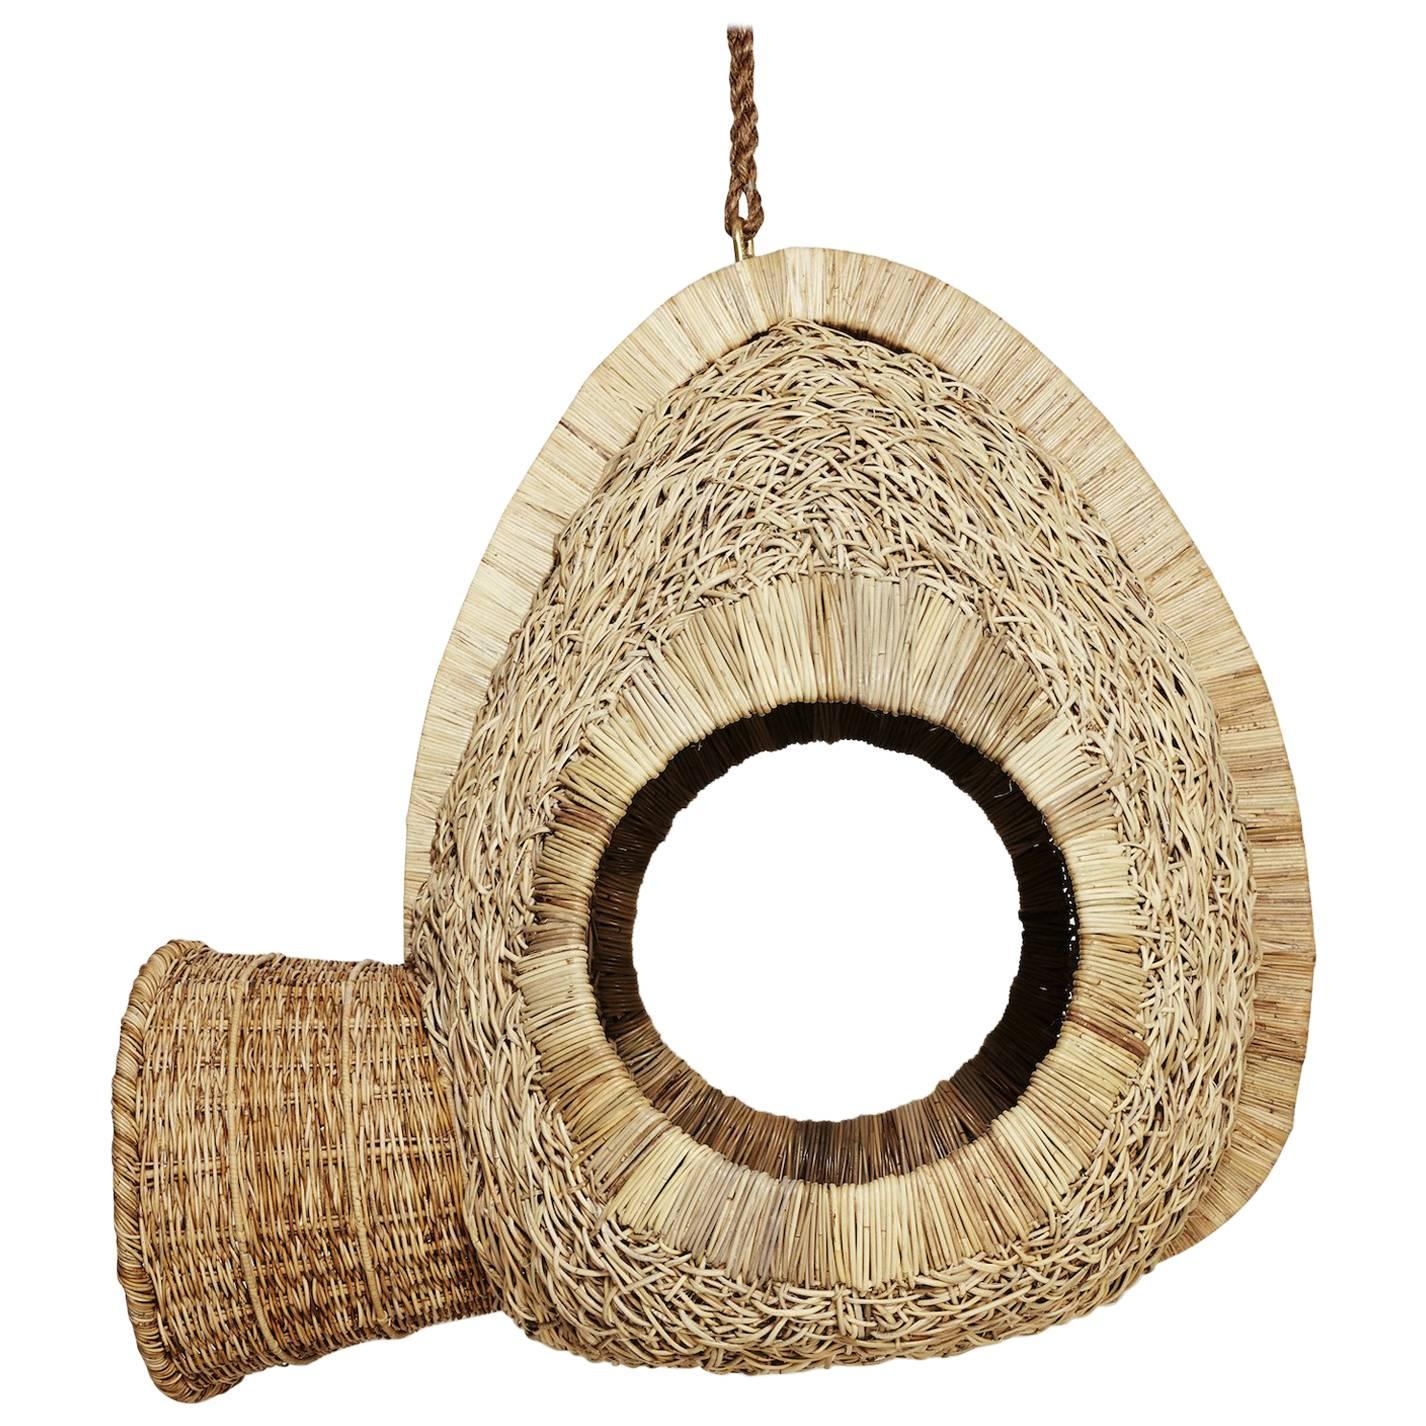 Bwa Leaf Mask Sculptural Hanging Seat in Woven Leather and Kubu Rattan